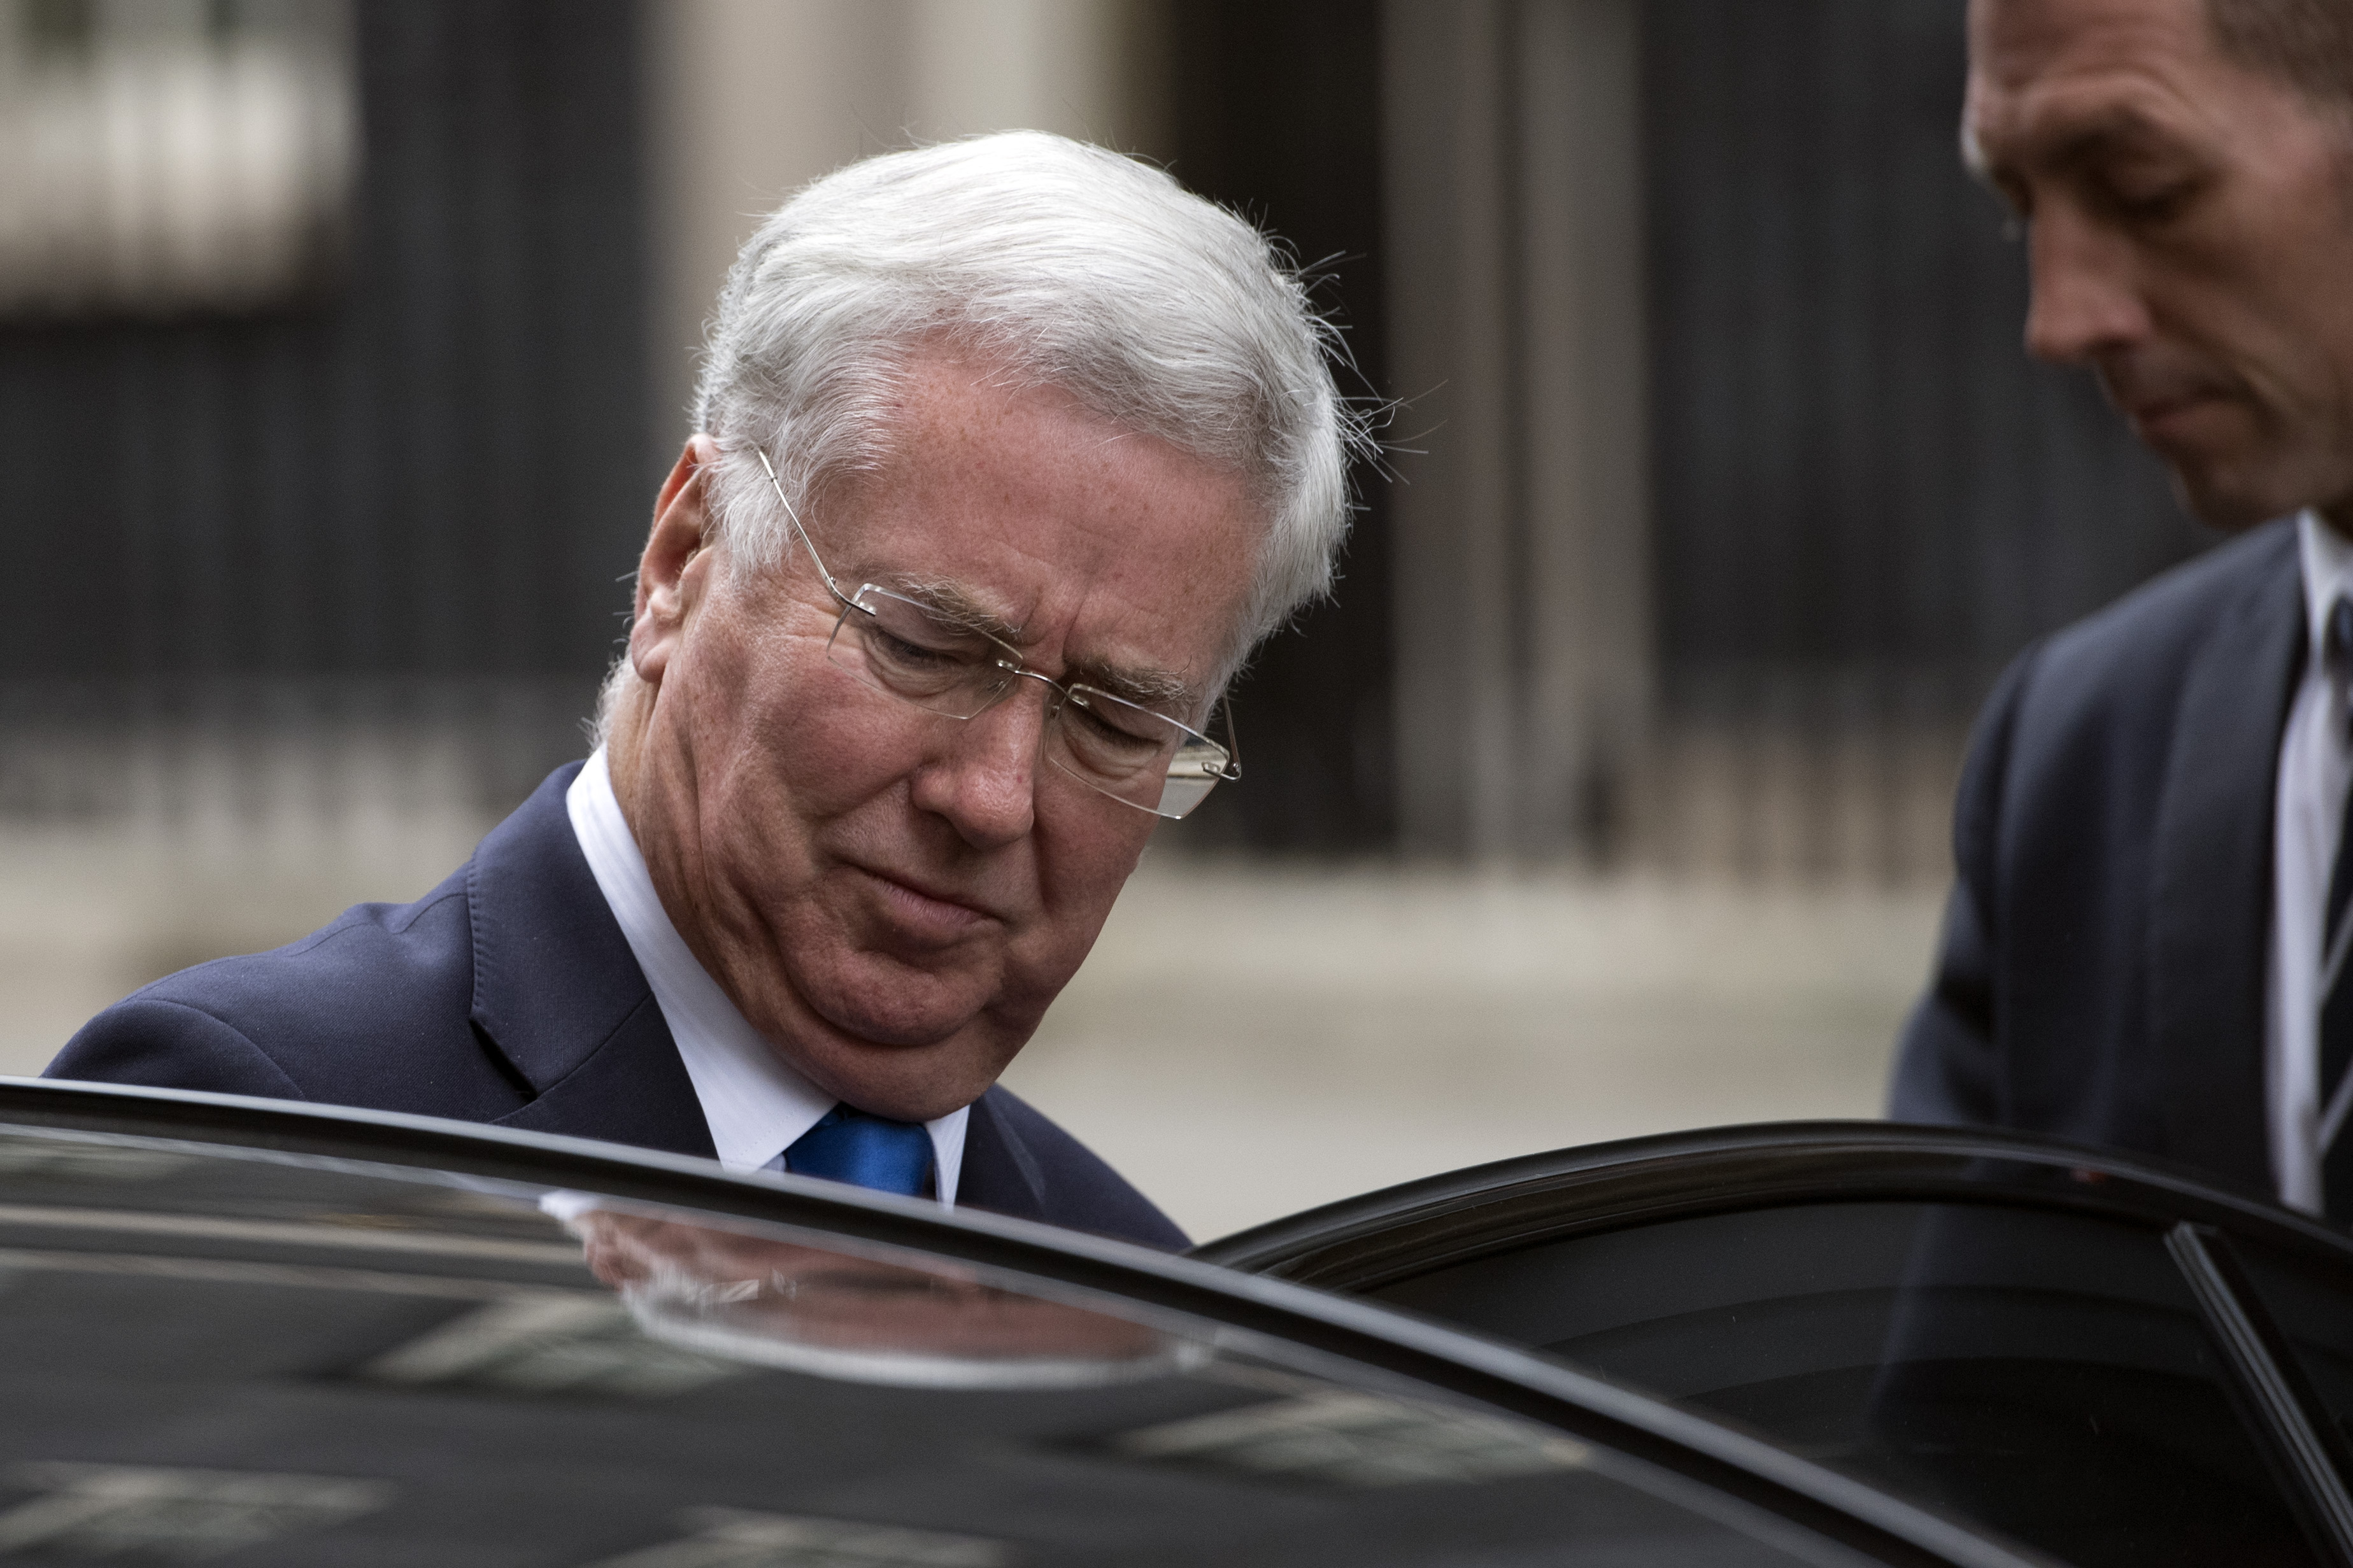 LONDON, ENGLAND - OCTOBER 31: Defence secretary Michael Fallon leaves after attending a cabinet meeting in Downing Street on October 31, 2017 in London, England. The Prime Minister is expected to discuss claims of sexual misconduct amongst members of parliament and Commons staff. (Photo by Carl Court/Getty Images)